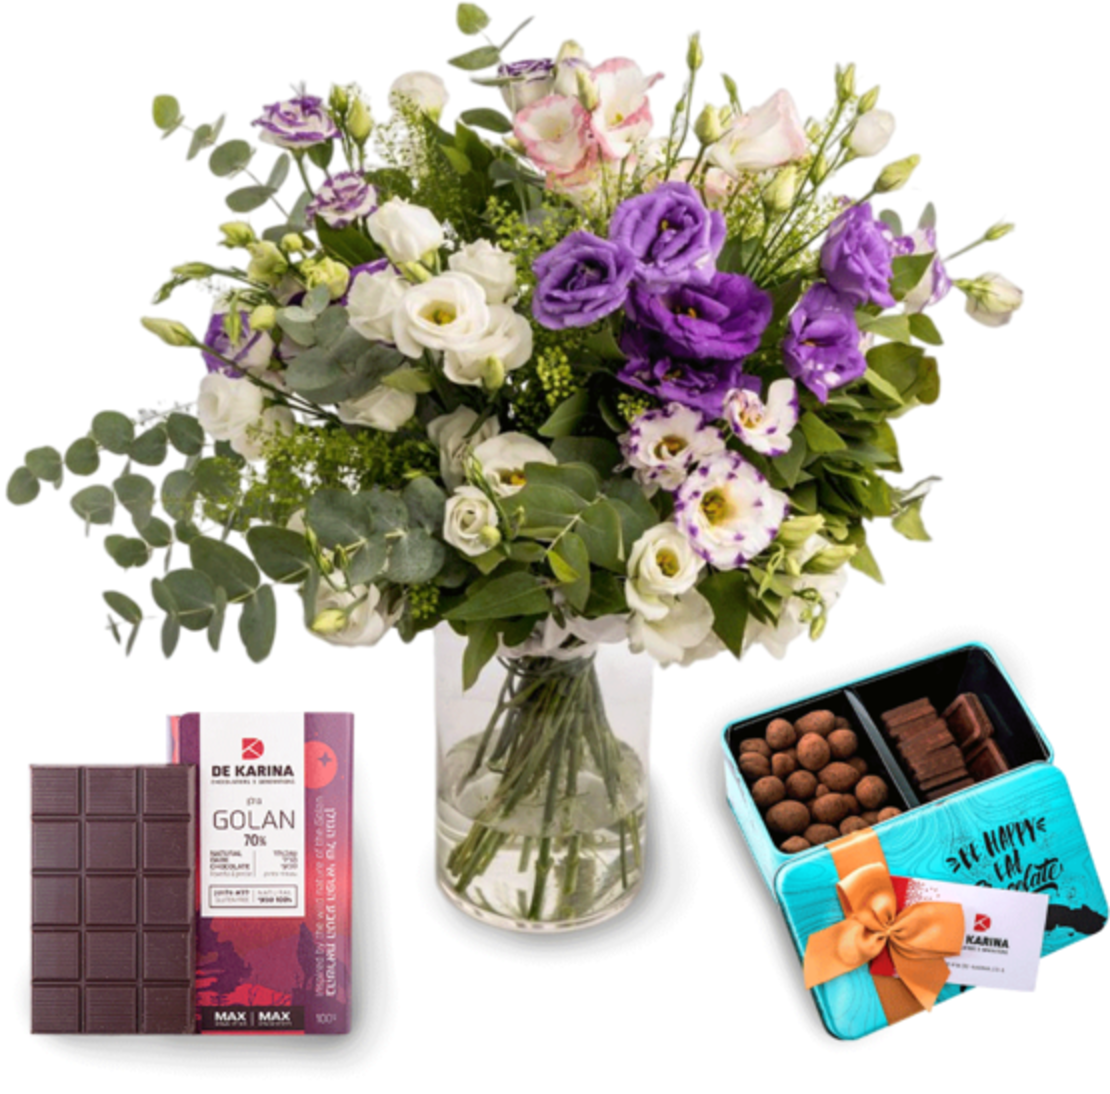 A box of flowers and chocolates